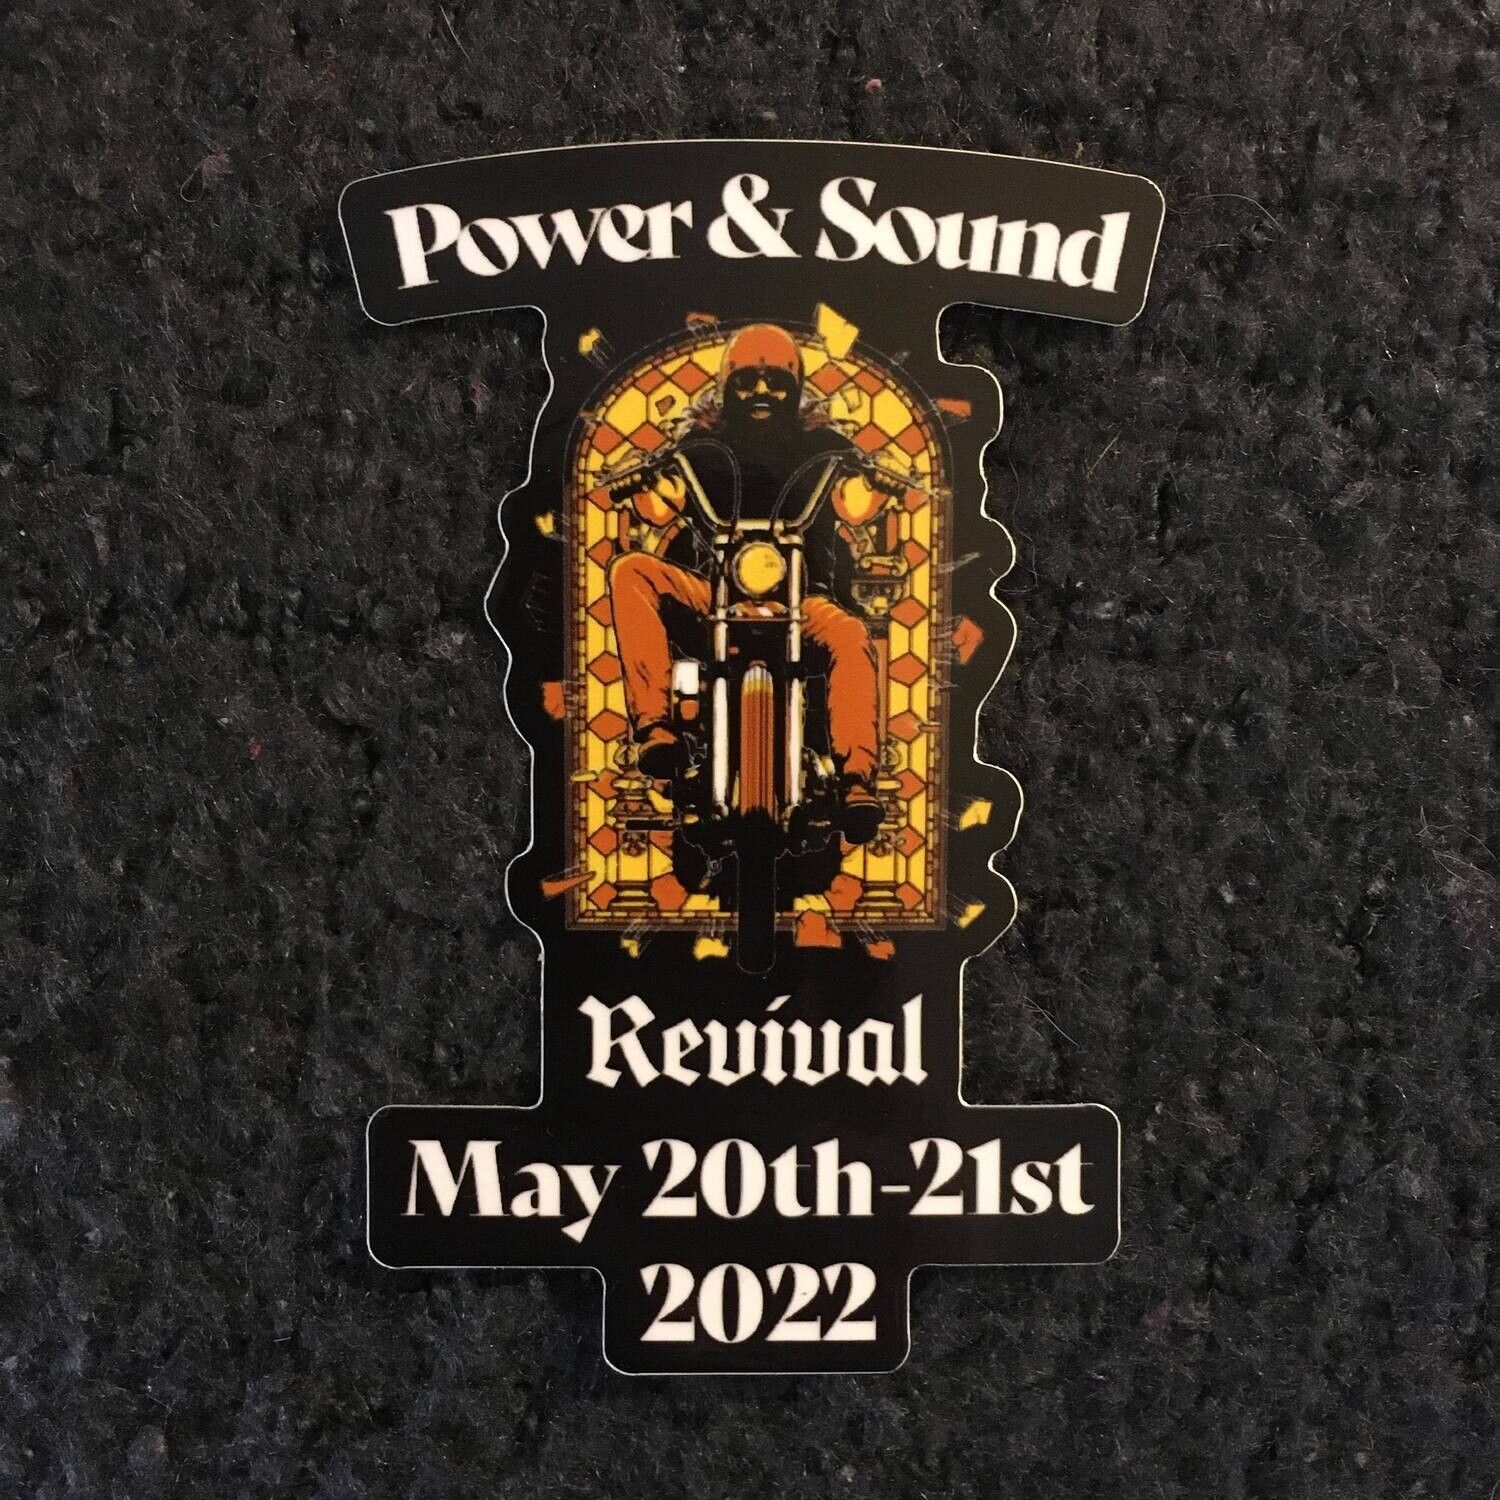 Power & Sound Revival 2022 Motorcycle Dude Stickers